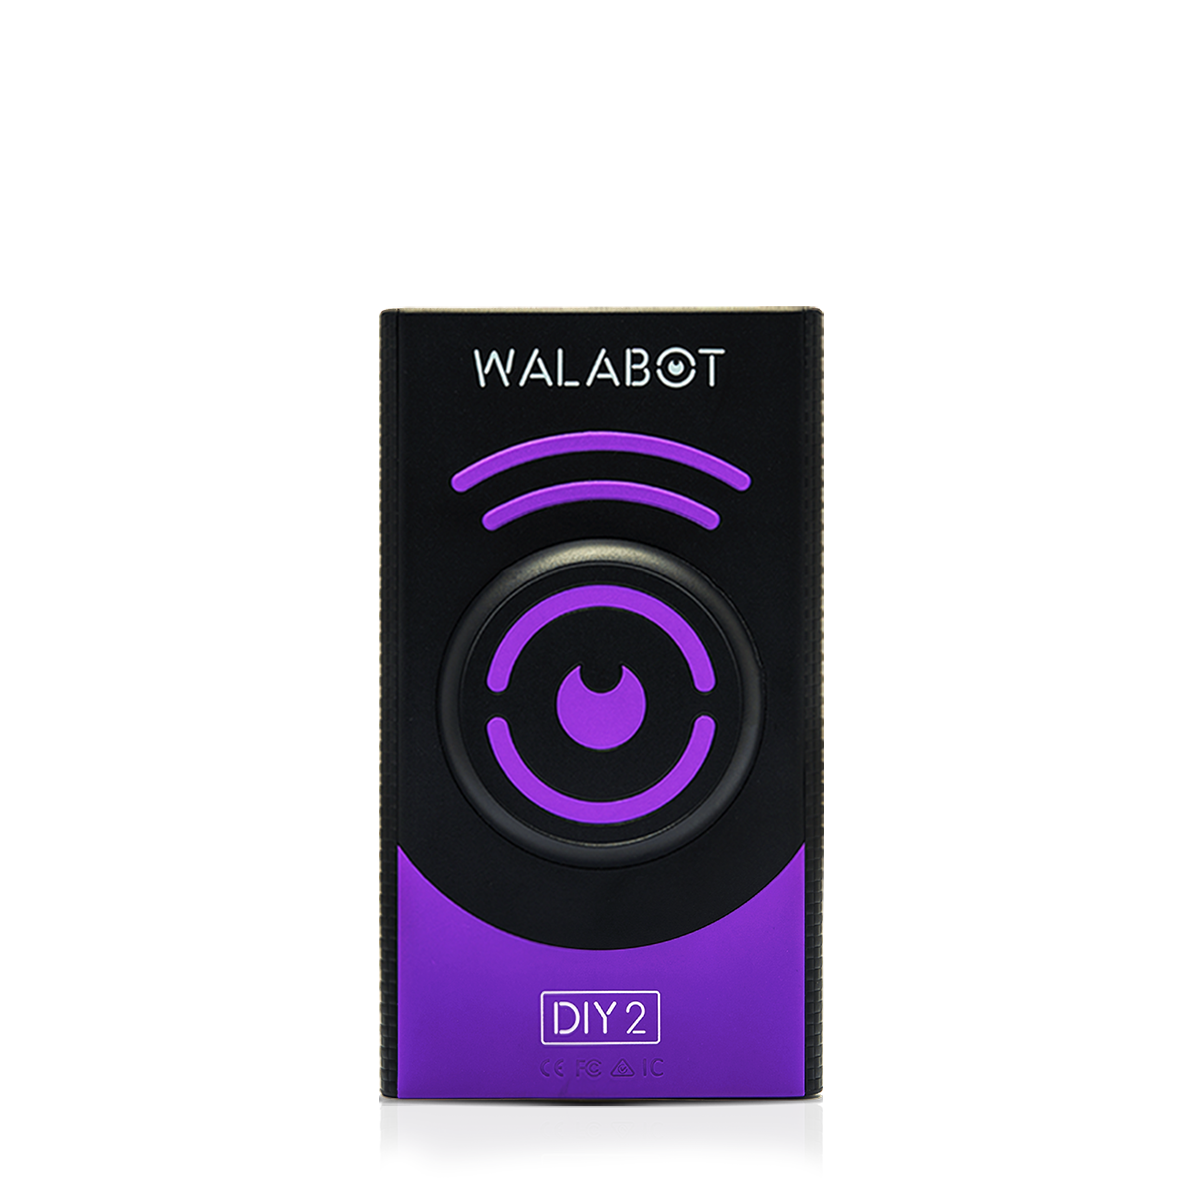 Walabot DIY 2 M - Advanced Wall Scanner for DIY Projects